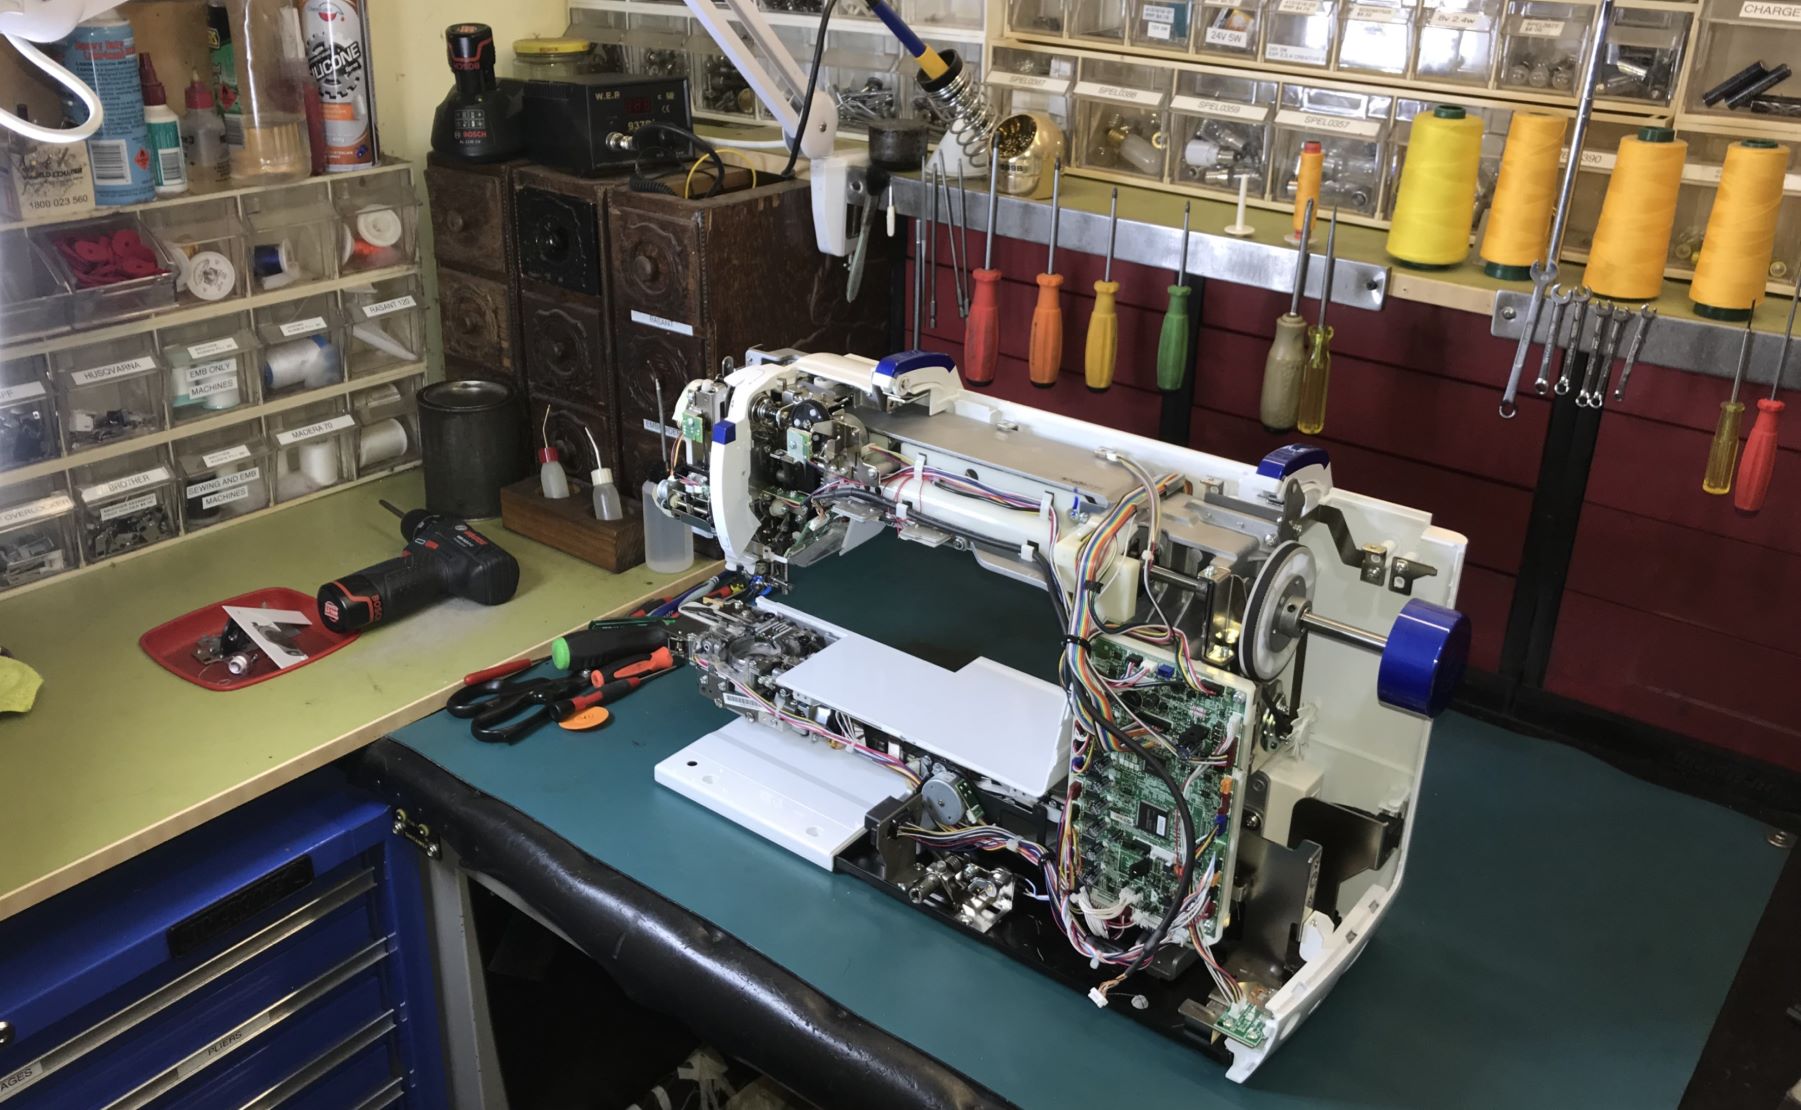 Able Sewing Machine Repairs - Service